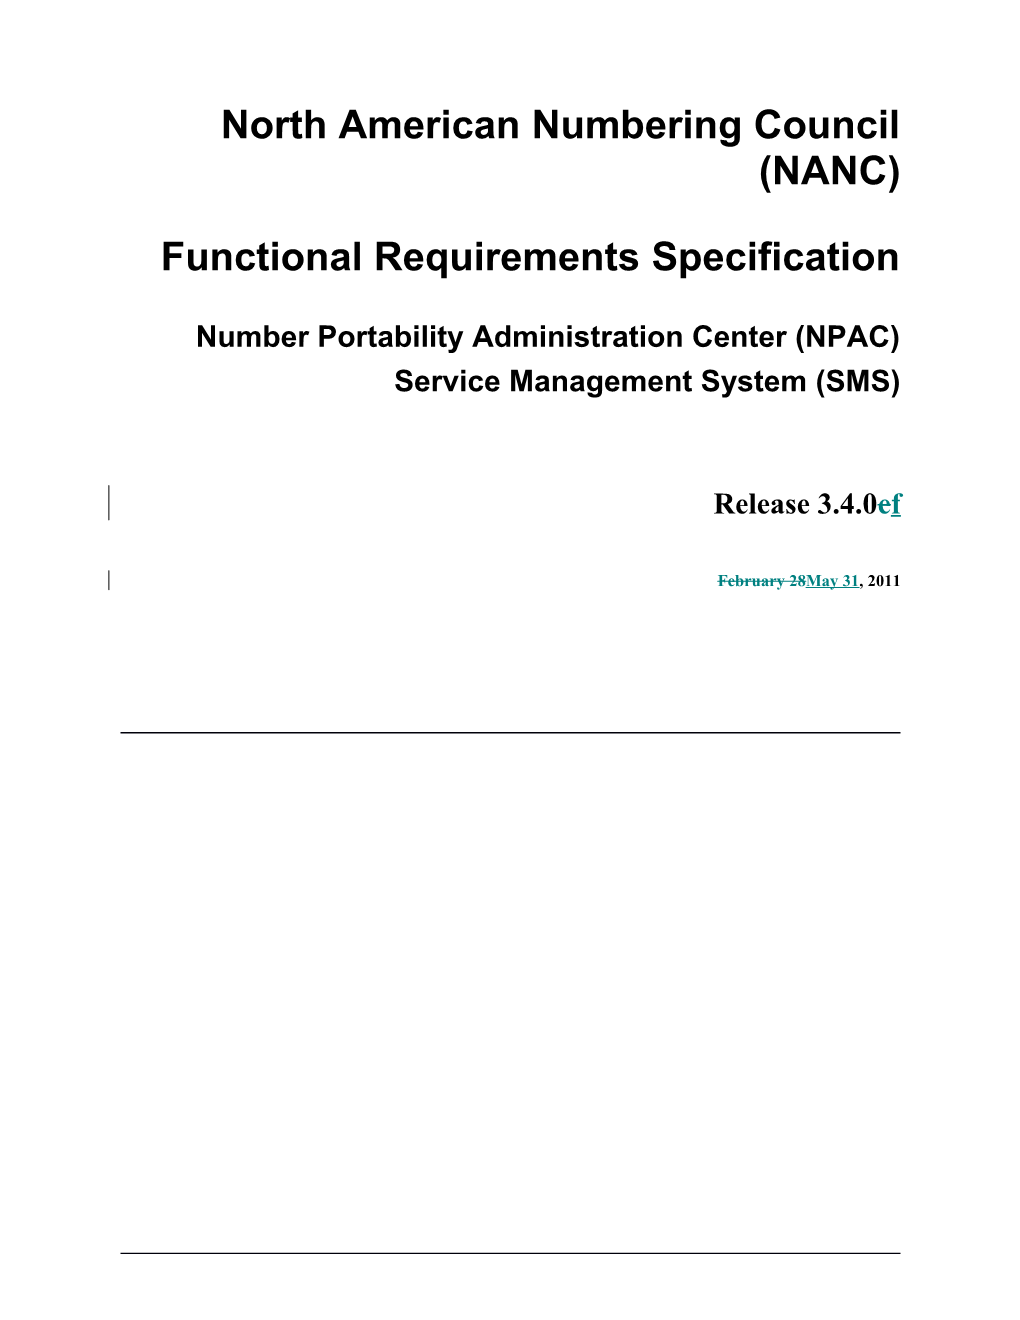 Functional Requirements Specification